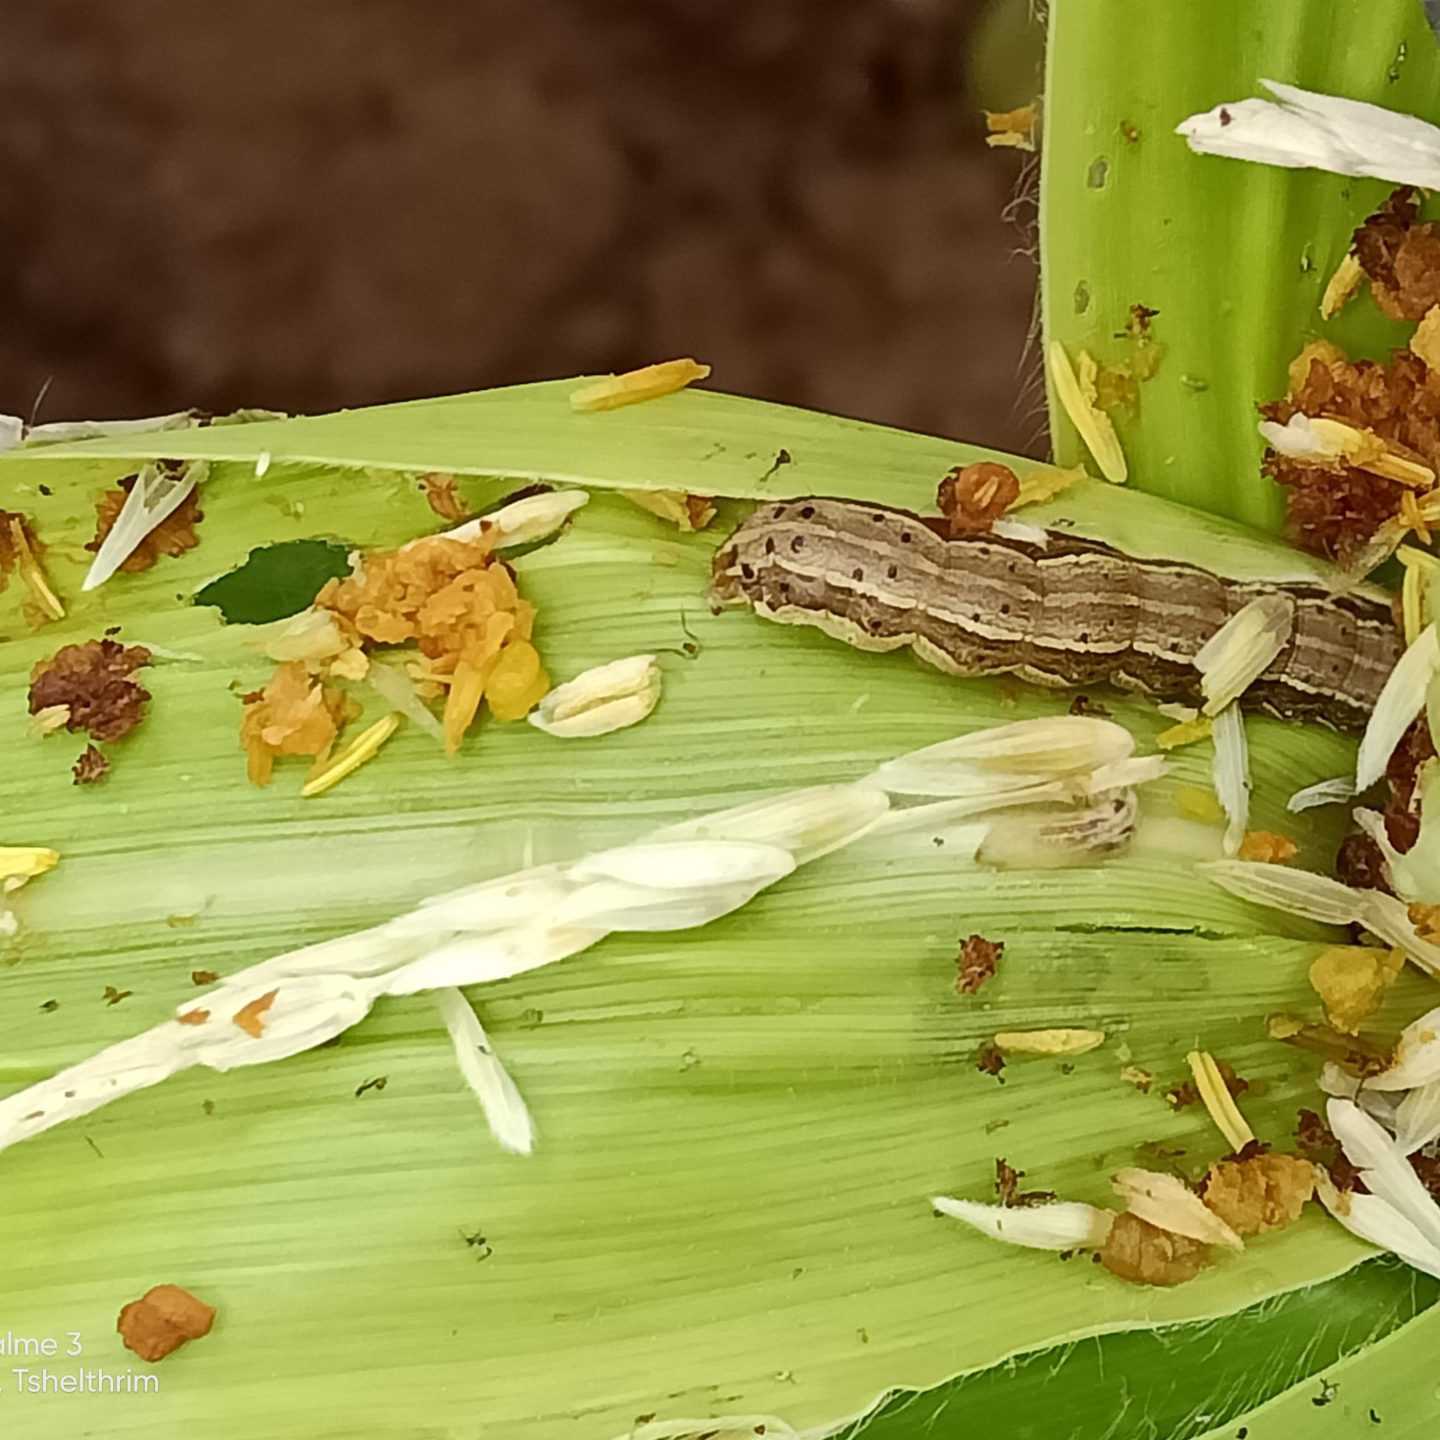 The Global Action for Fall armyworm Control